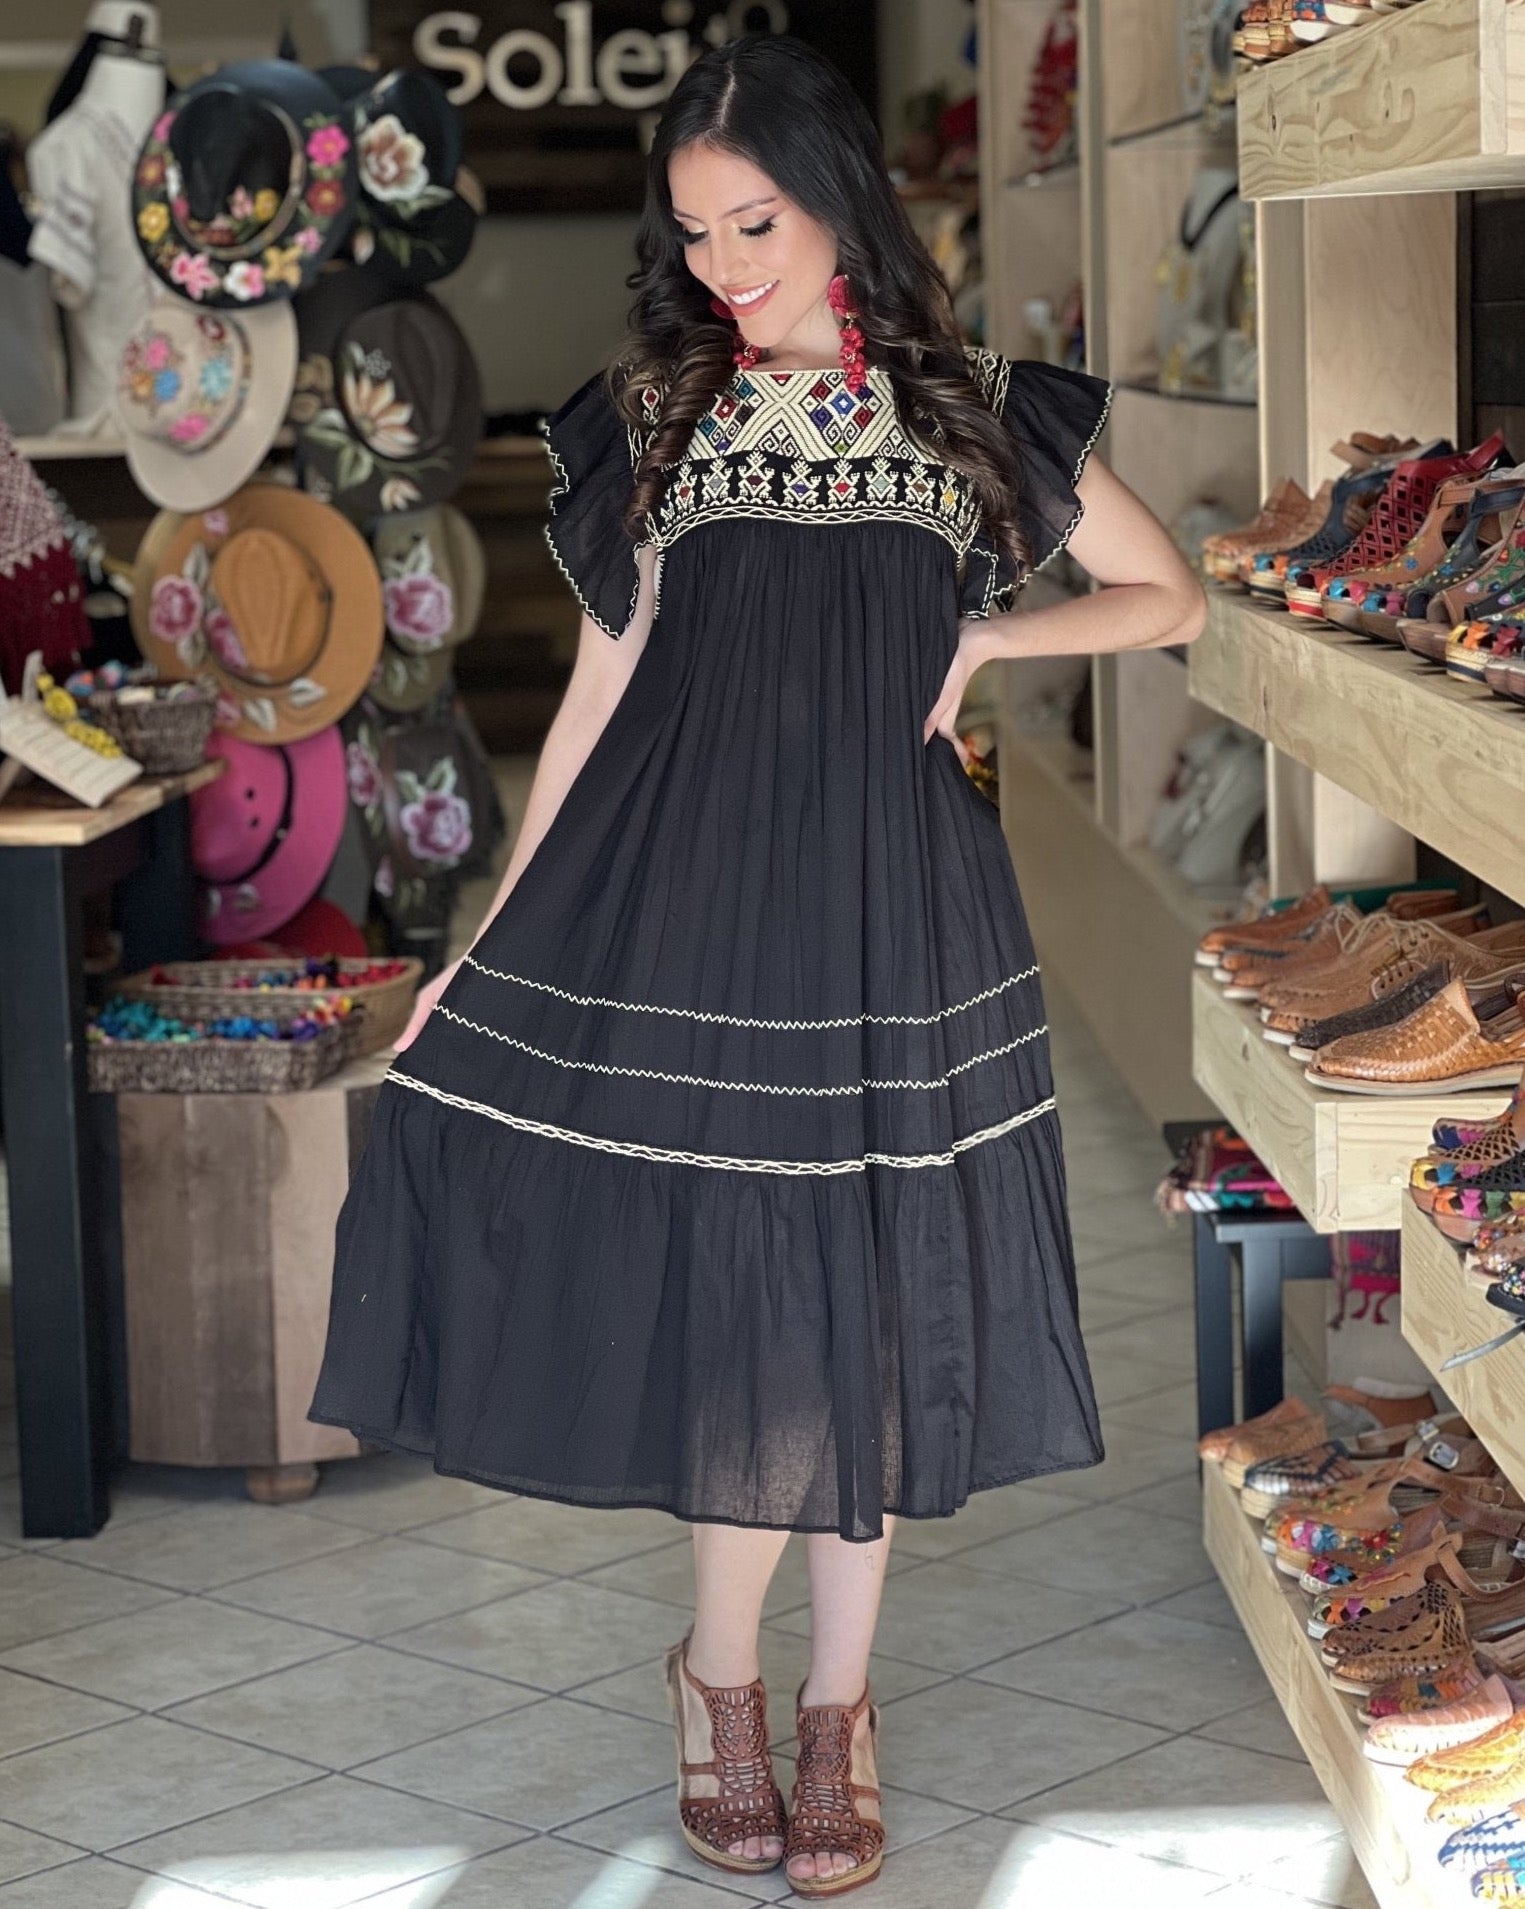 Traditional Mexican Dress. Embroidered Tunic Dress Made on a Loom. Loana Dress. - Solei Store